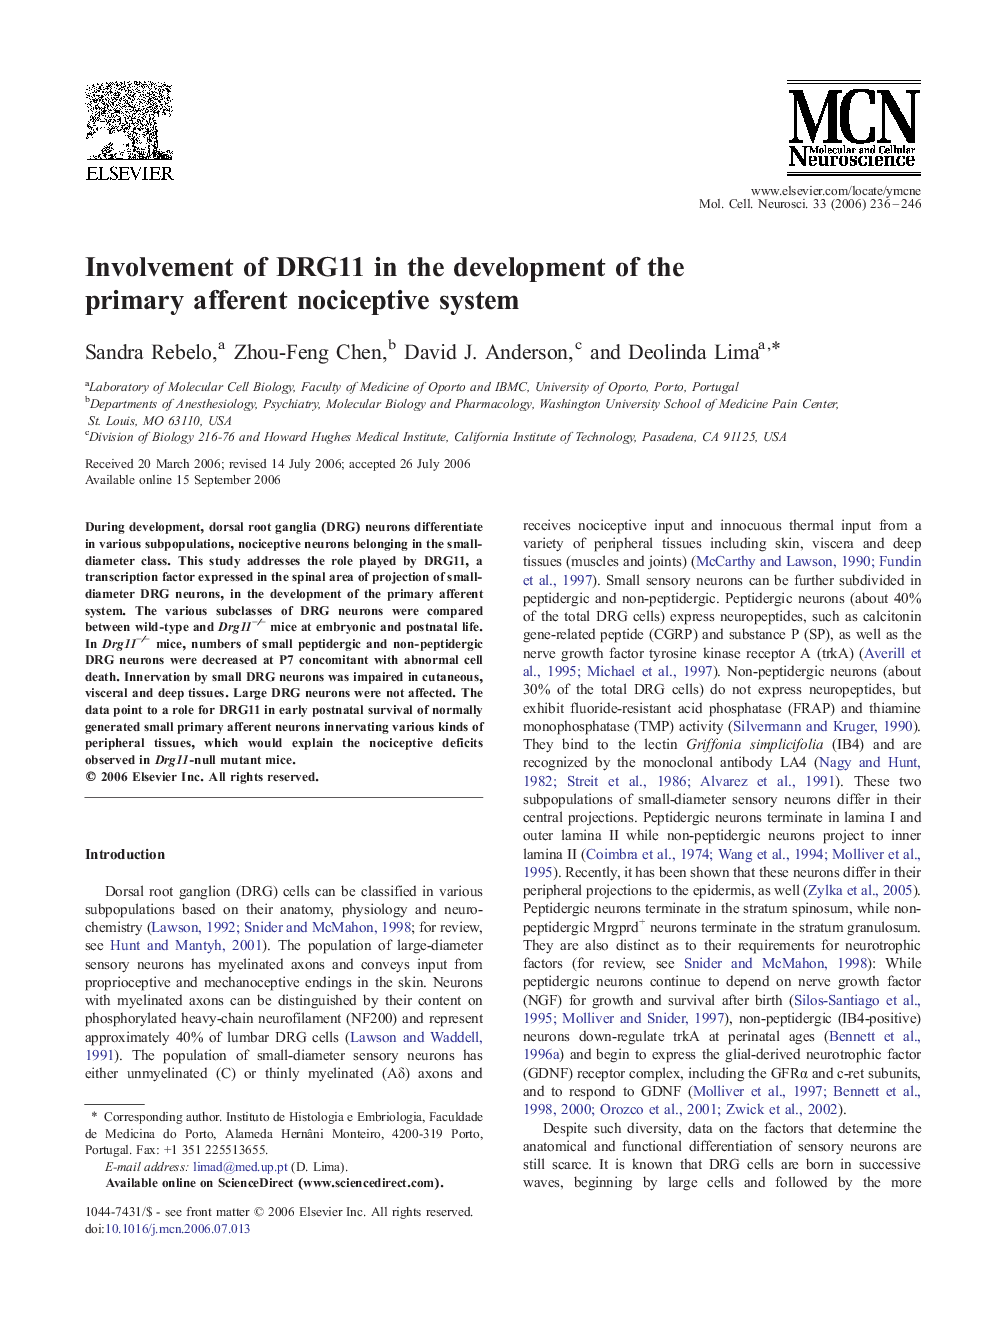 Involvement of DRG11 in the development of the primary afferent nociceptive system